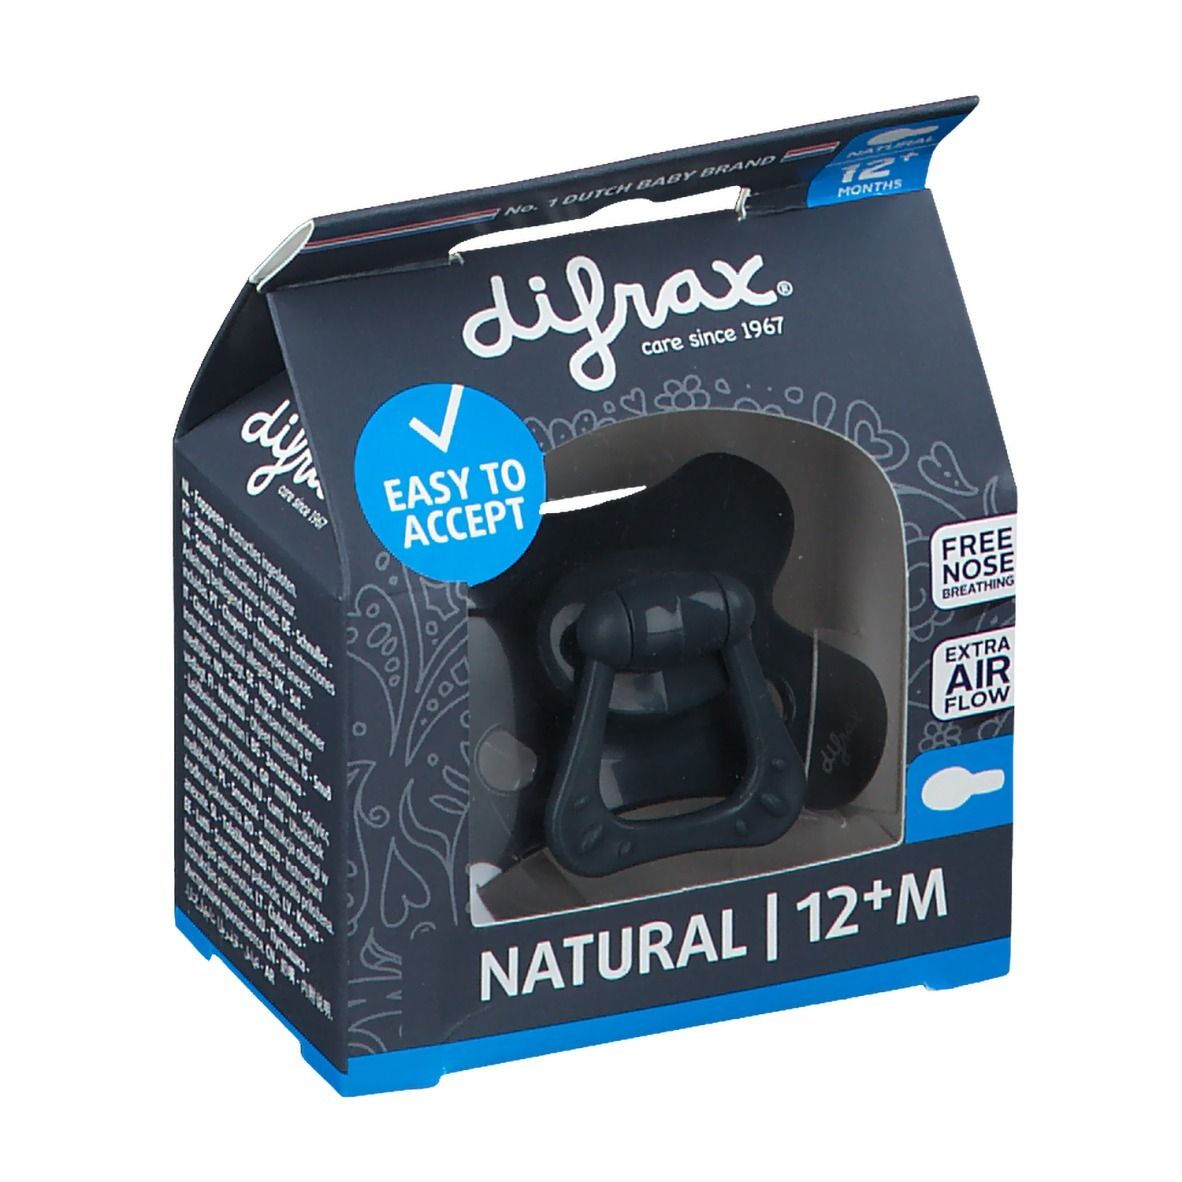 Difrax® Sucette Natural +12 Mois - Evening